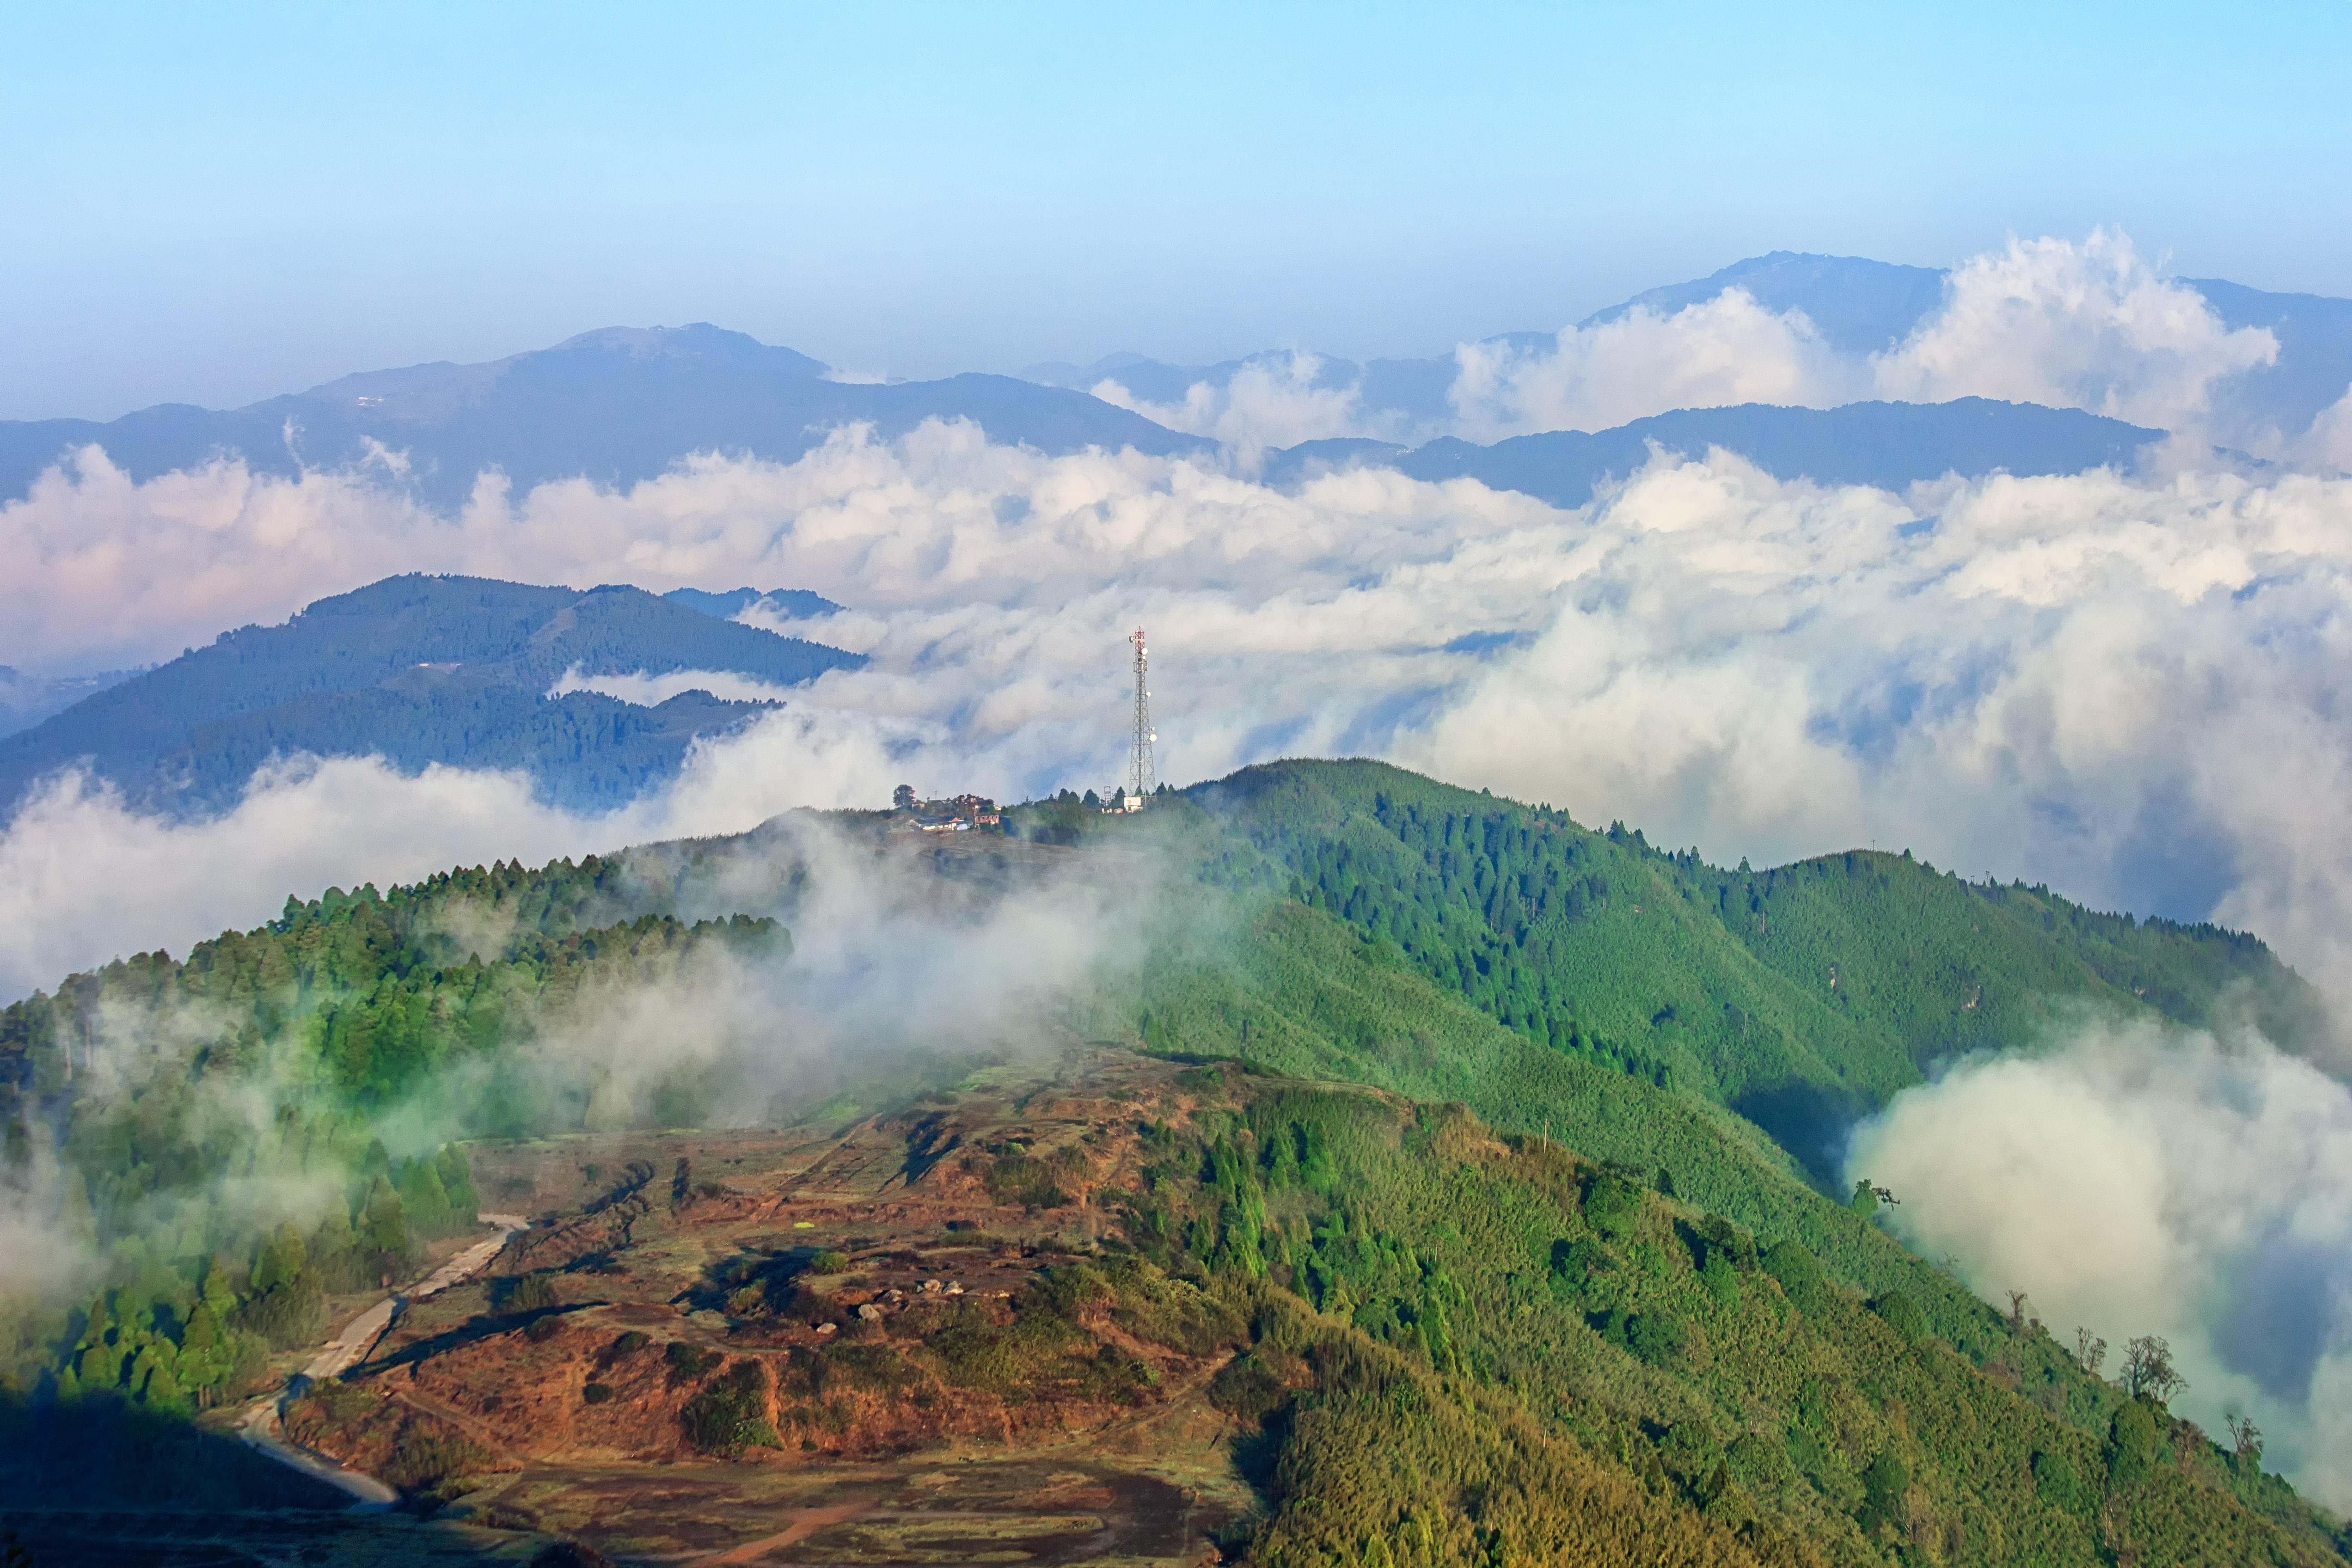 After a Tiger Hill, immerse yourself in the mesmerizing views of the serene landscape